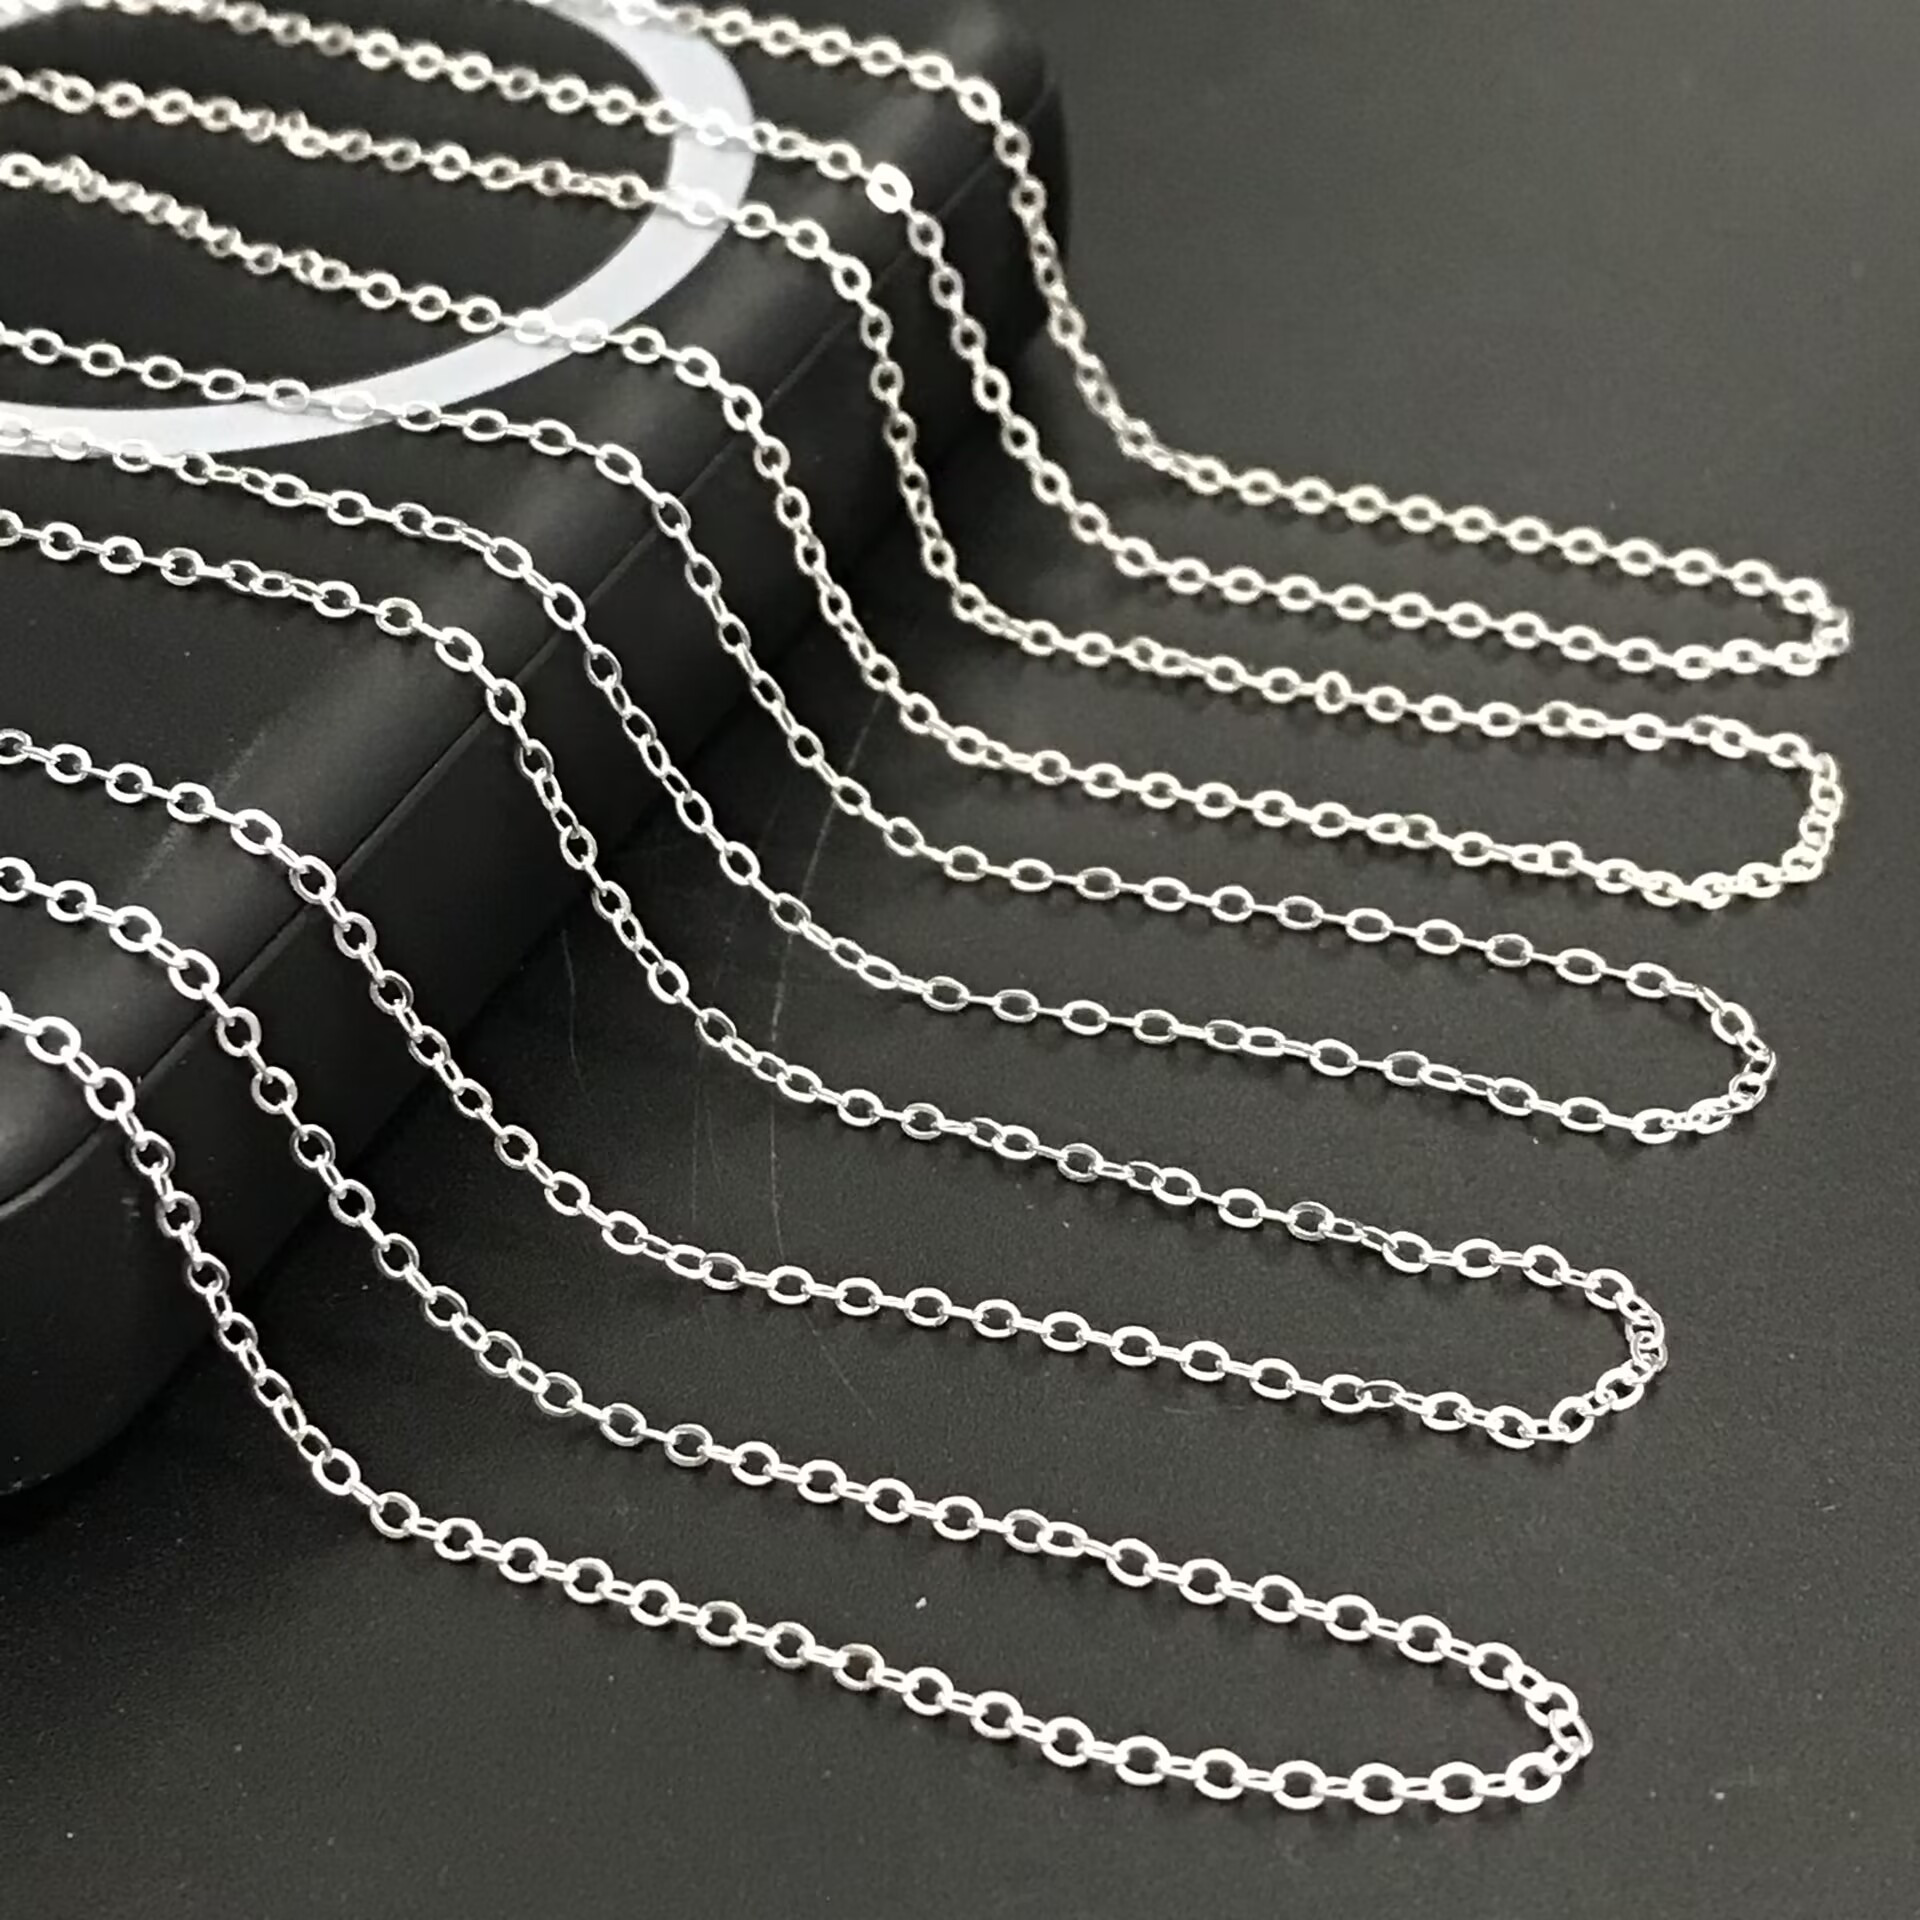 Jewelry Chains For Making Jewelry, With 1000 Jump Rings And 40 Lobster  Clasps For Jewelry Necklace